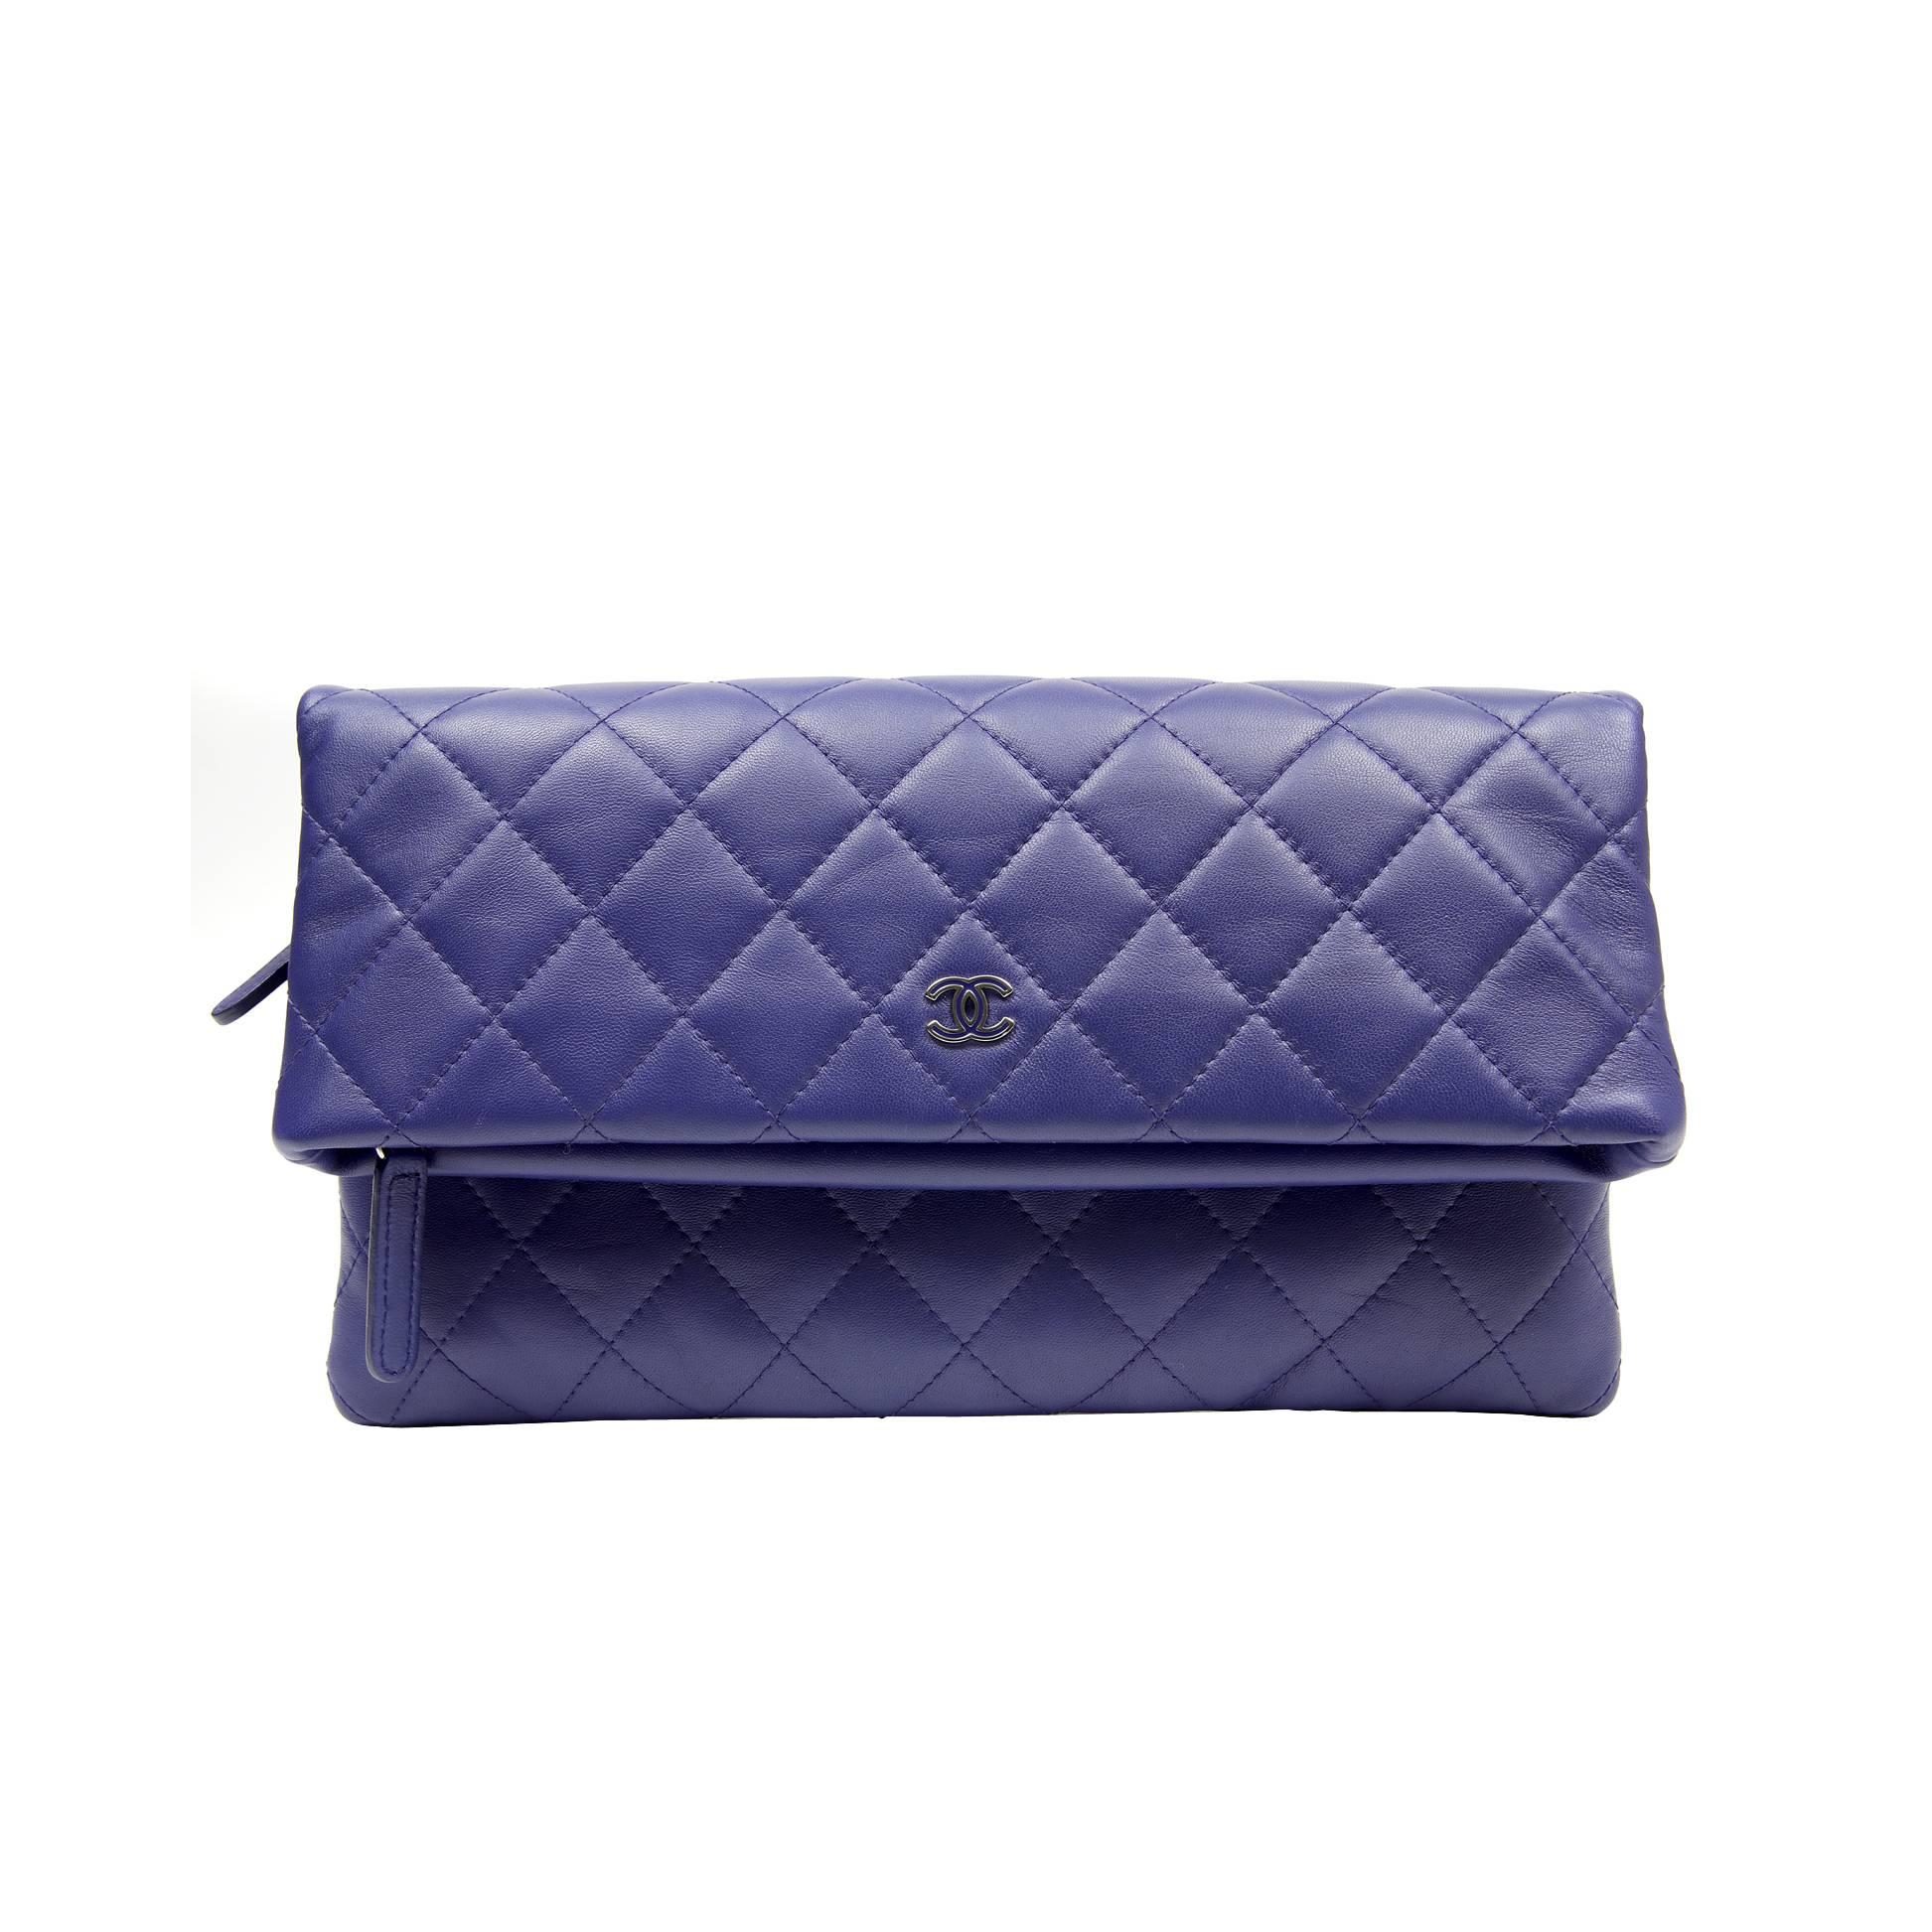 Chanel Purple Quilted Leather Foldover Clutch